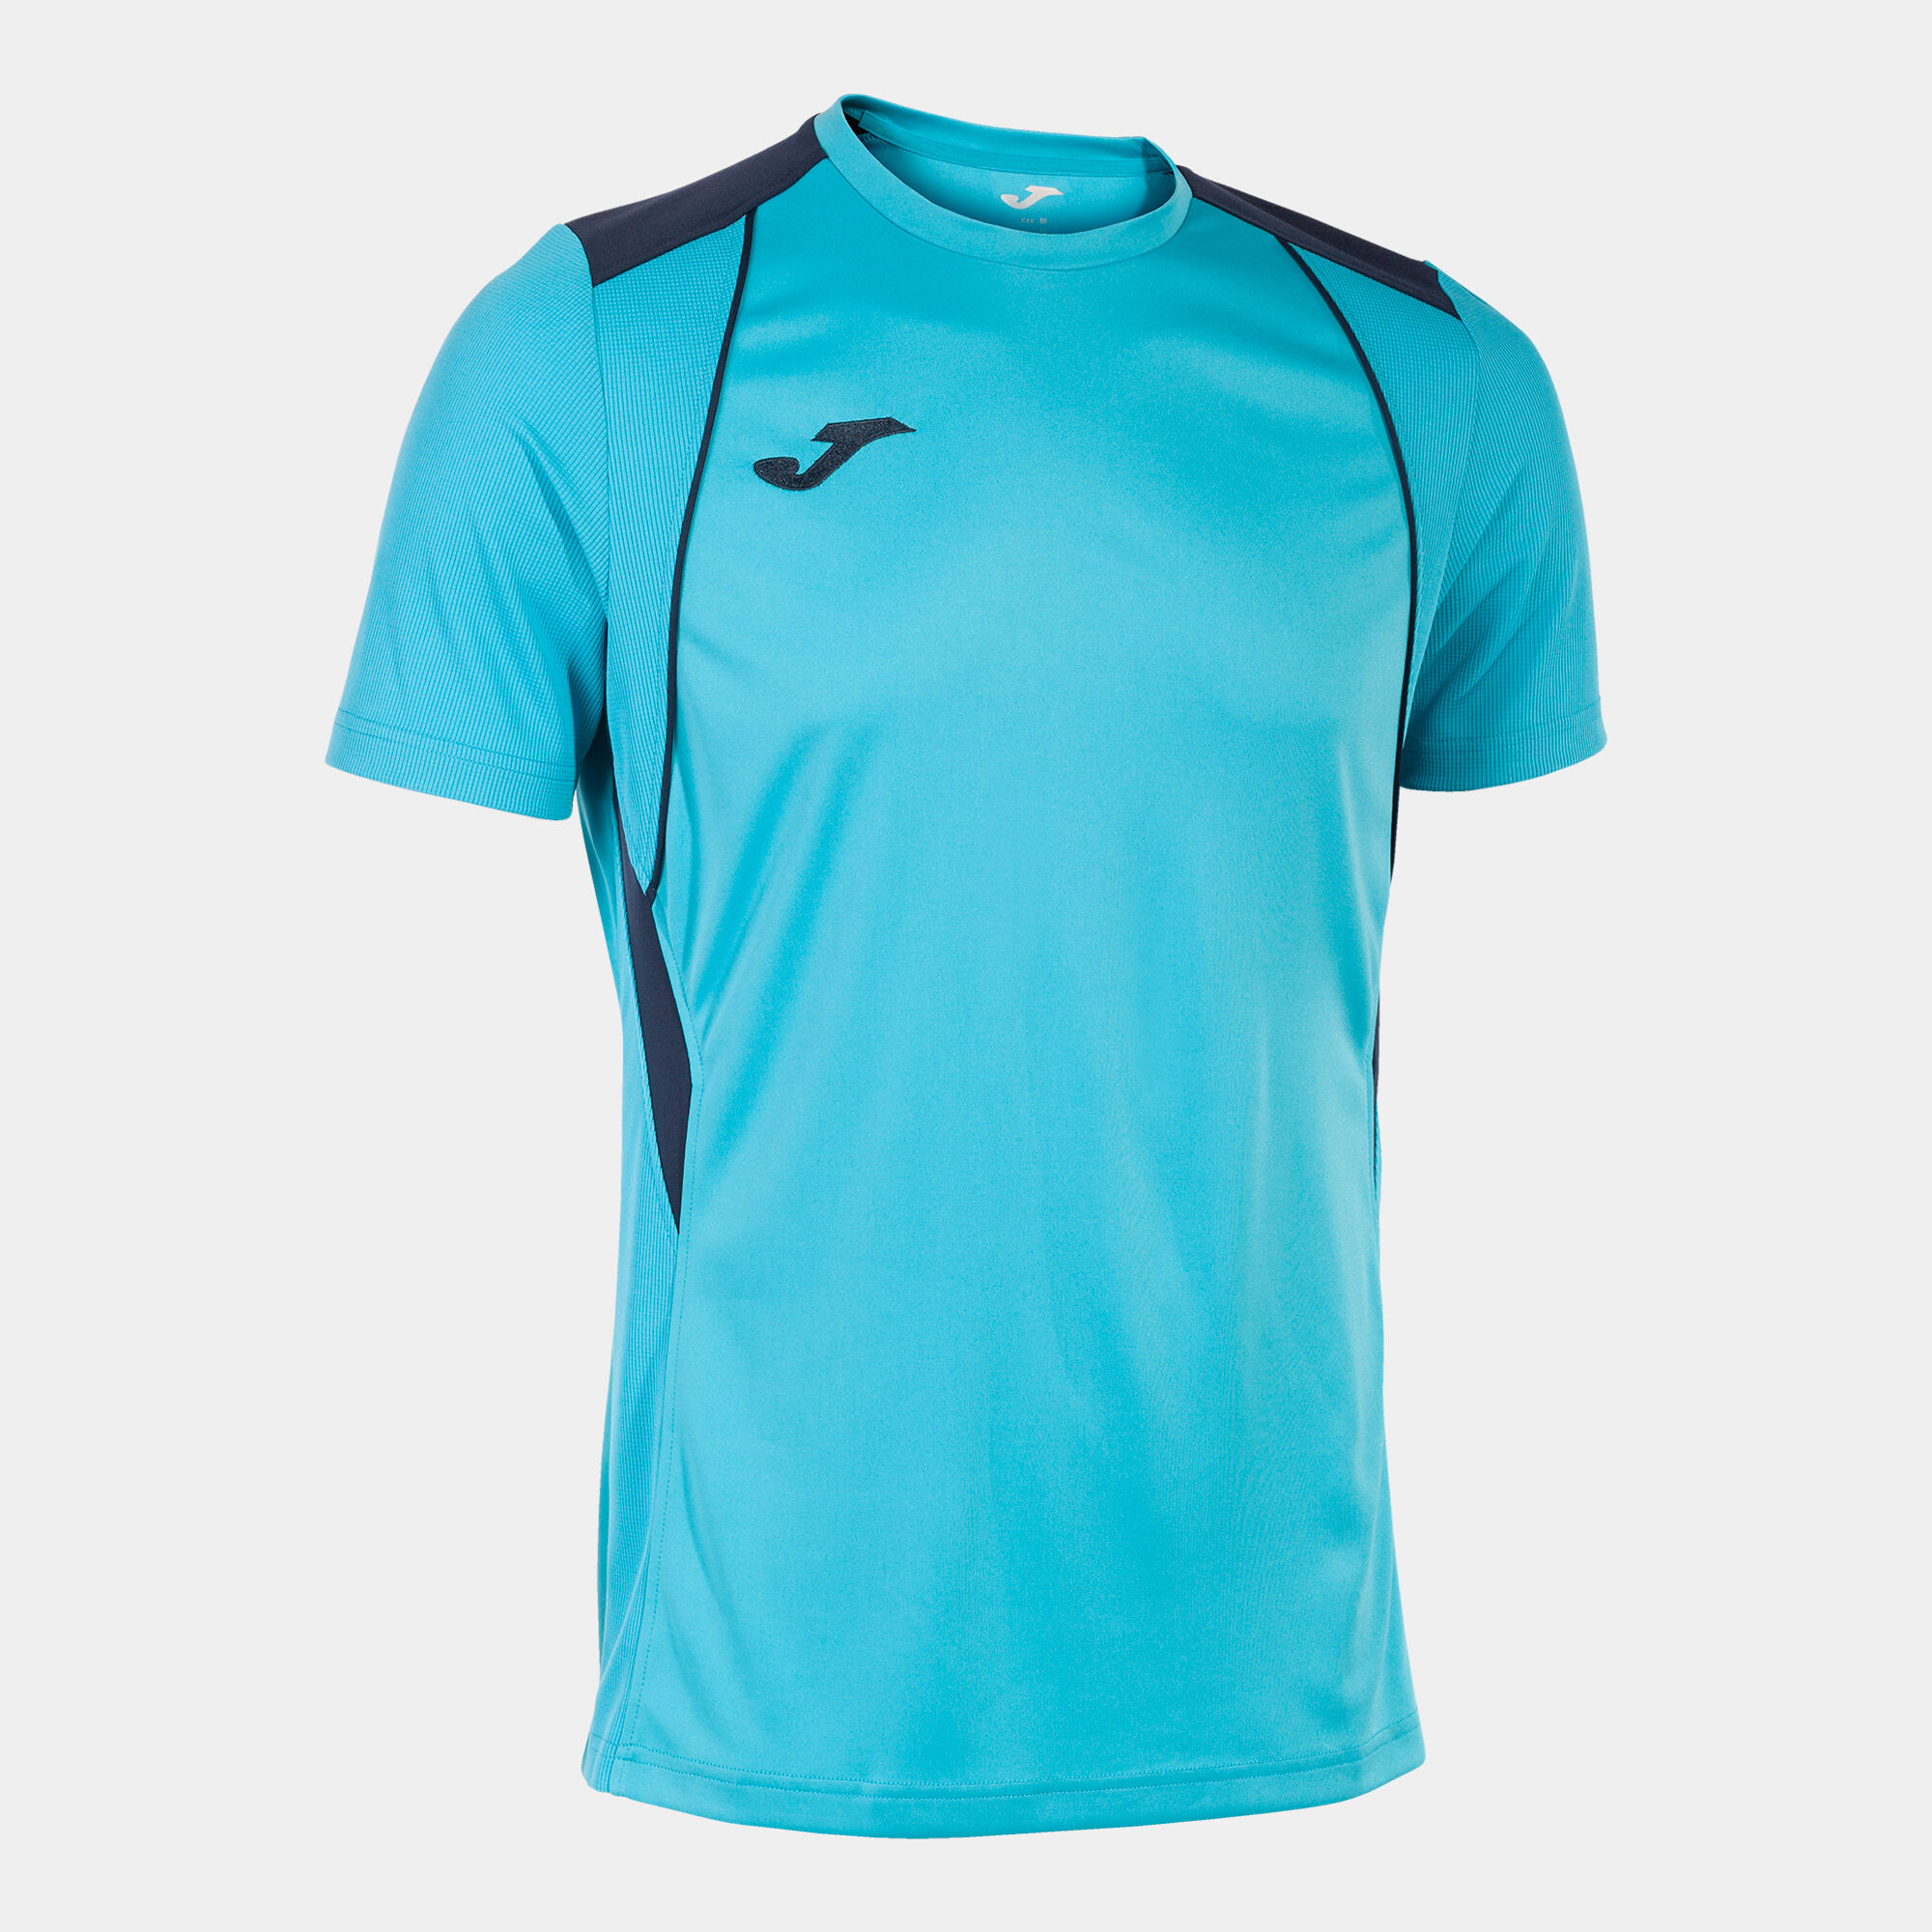 Maillot manches courtes homme Championship VII turquoise fluo bleu marine